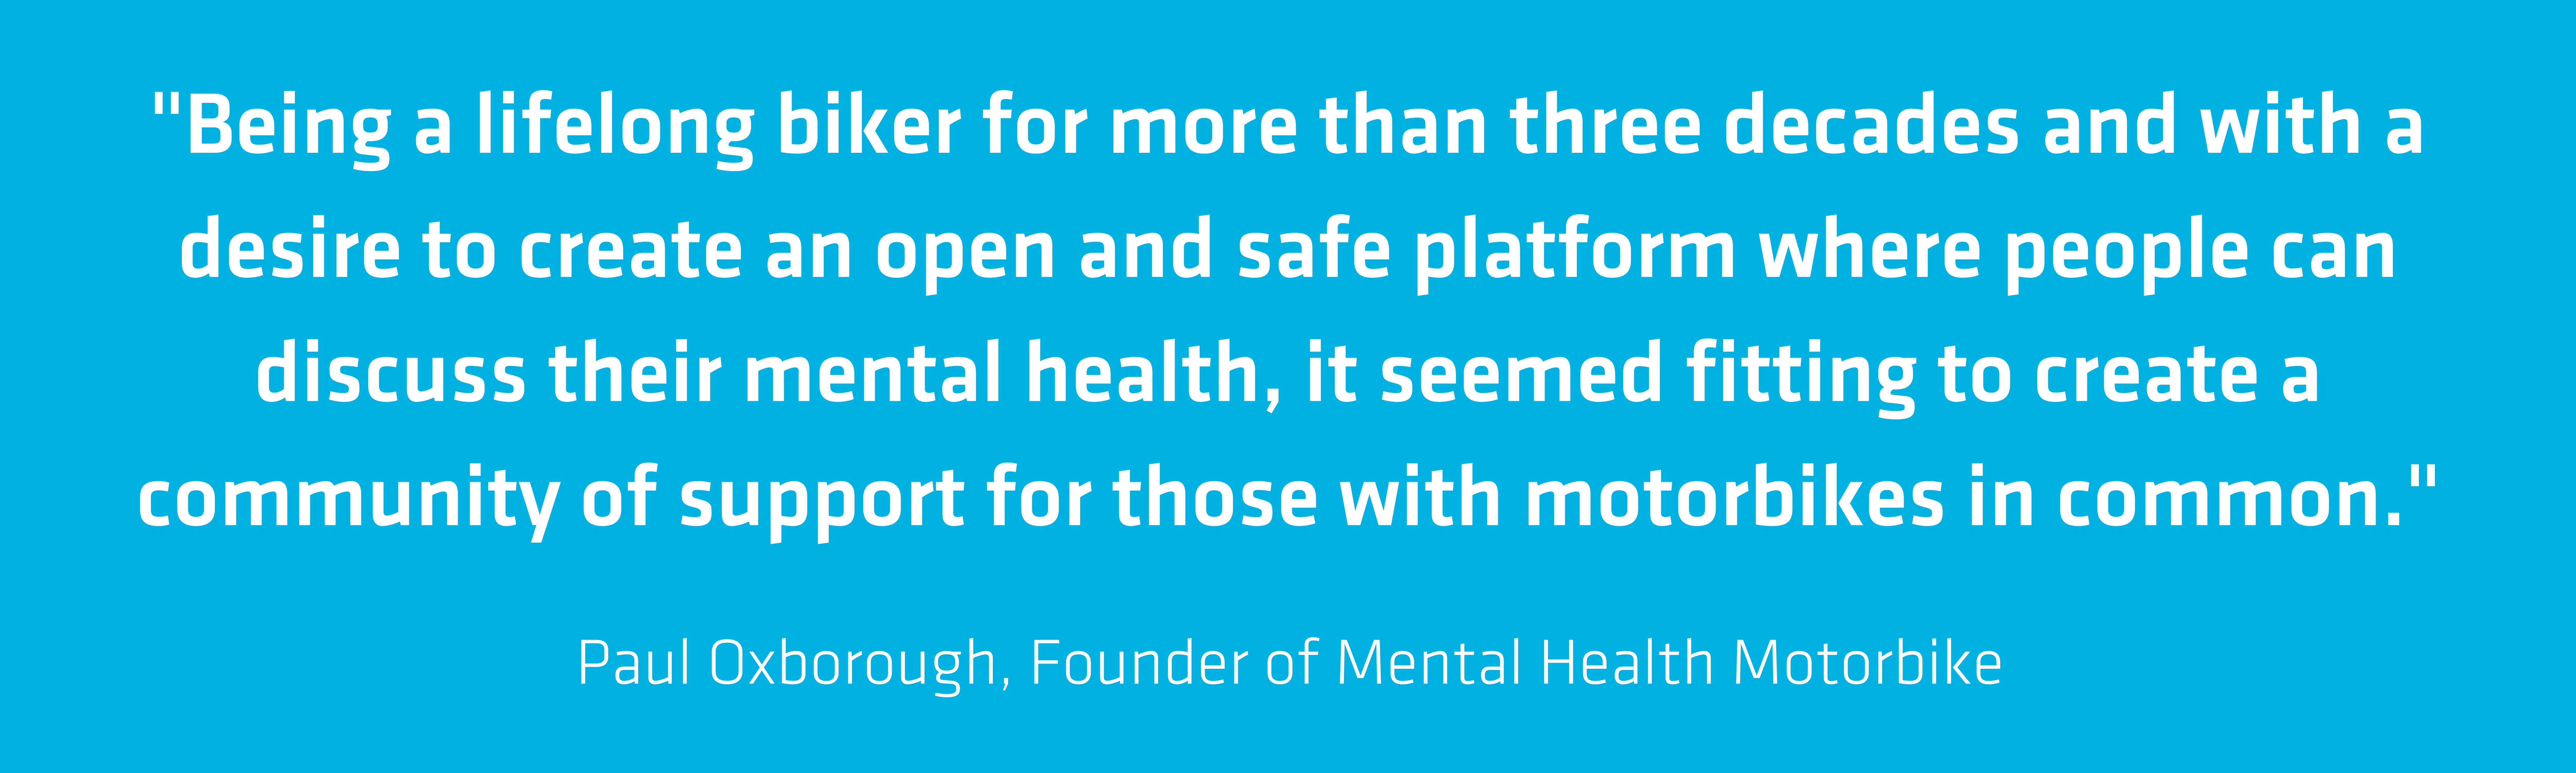 Being a lifelong biker for more than three decades and with a desire to create an open and safe platform where people can discuss their mental health, it seemed fitting to create a community of support for 